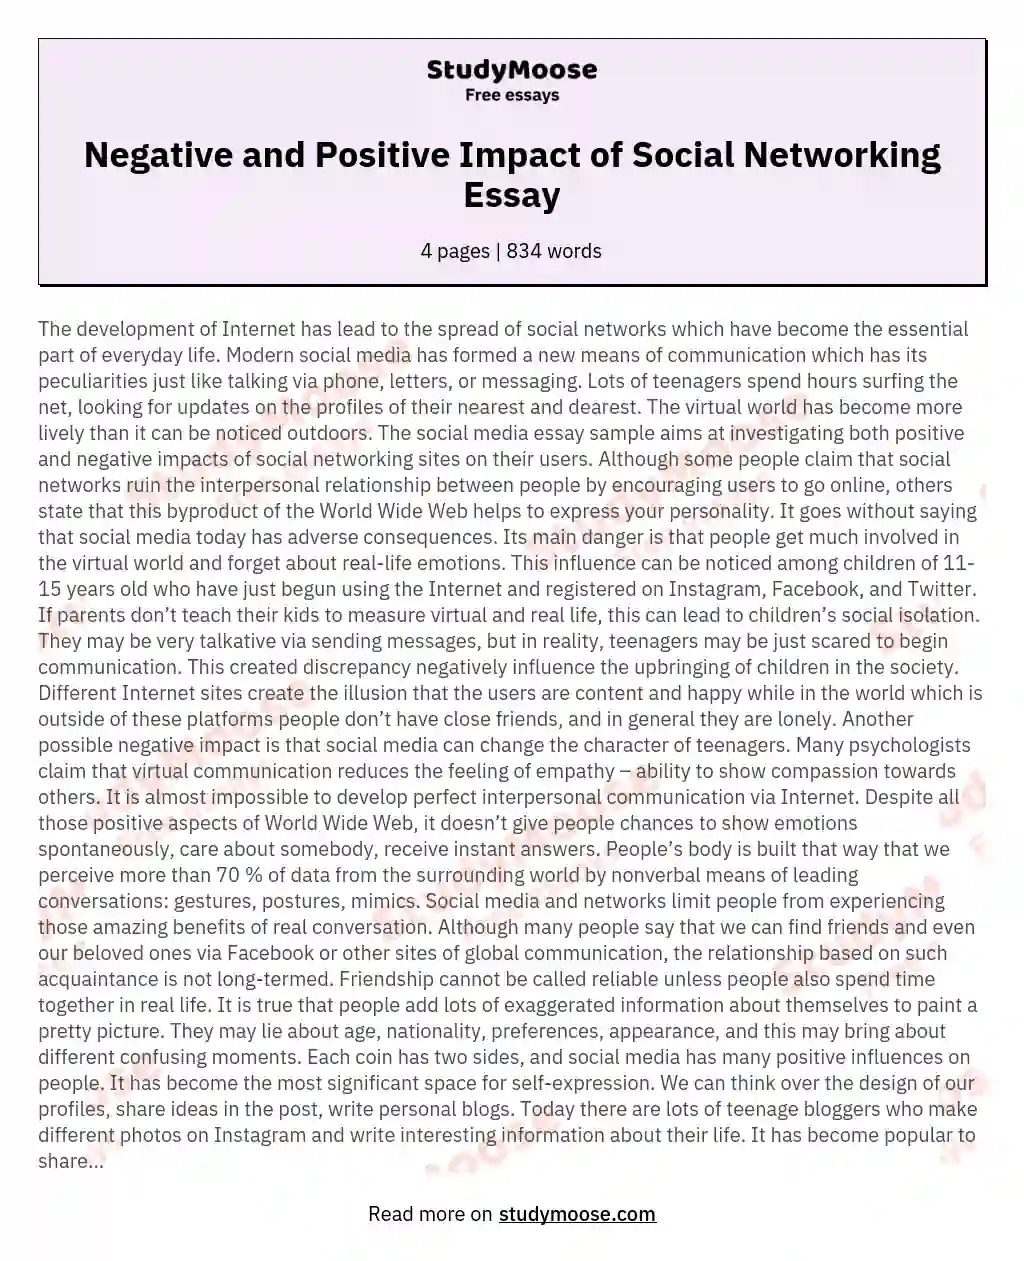 Negative and Positive Impact of Social Networking Essay essay